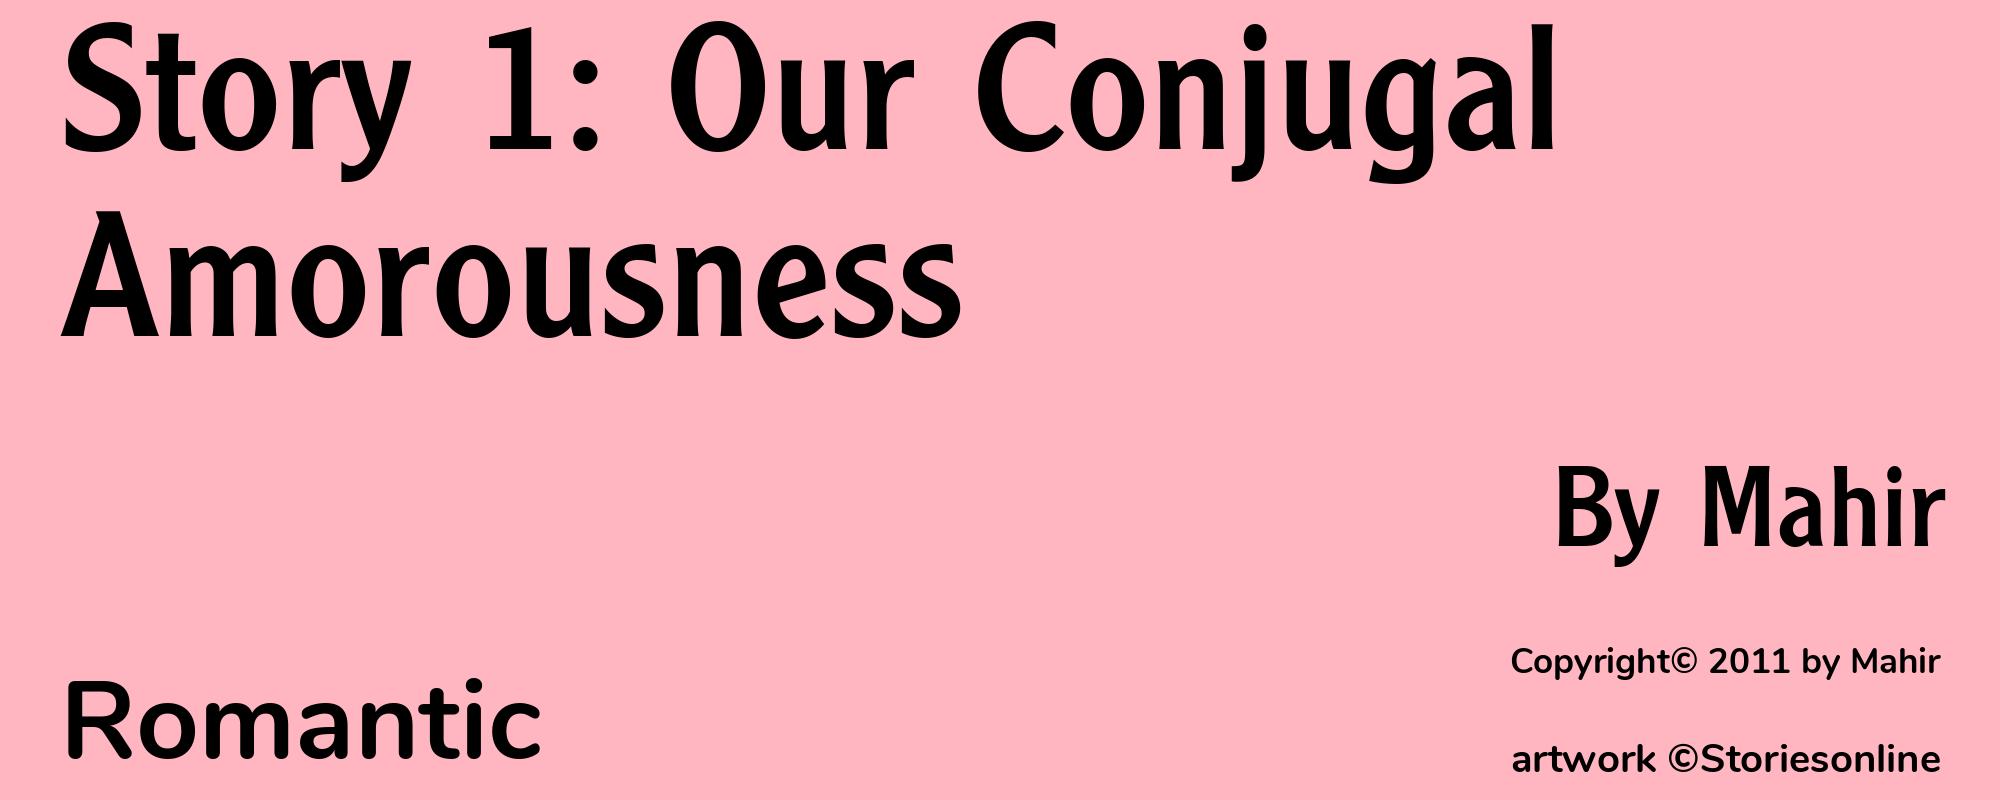 Story 1: Our Conjugal Amorousness - Cover